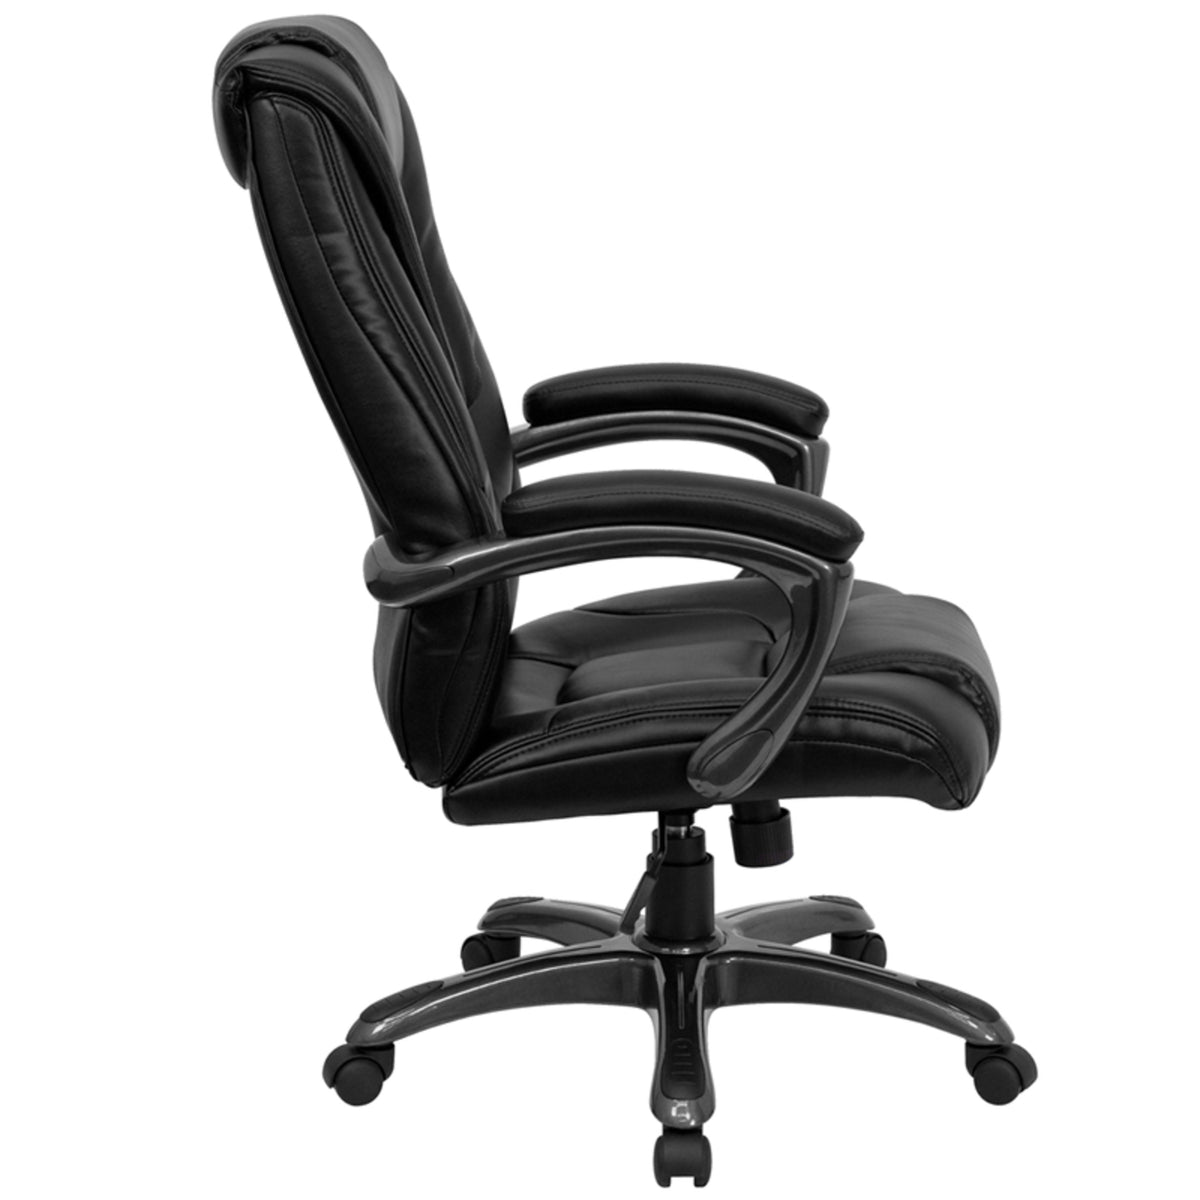 High Back Black LeatherSoft Layered Upholstered Executive Ergonomic Office Chair